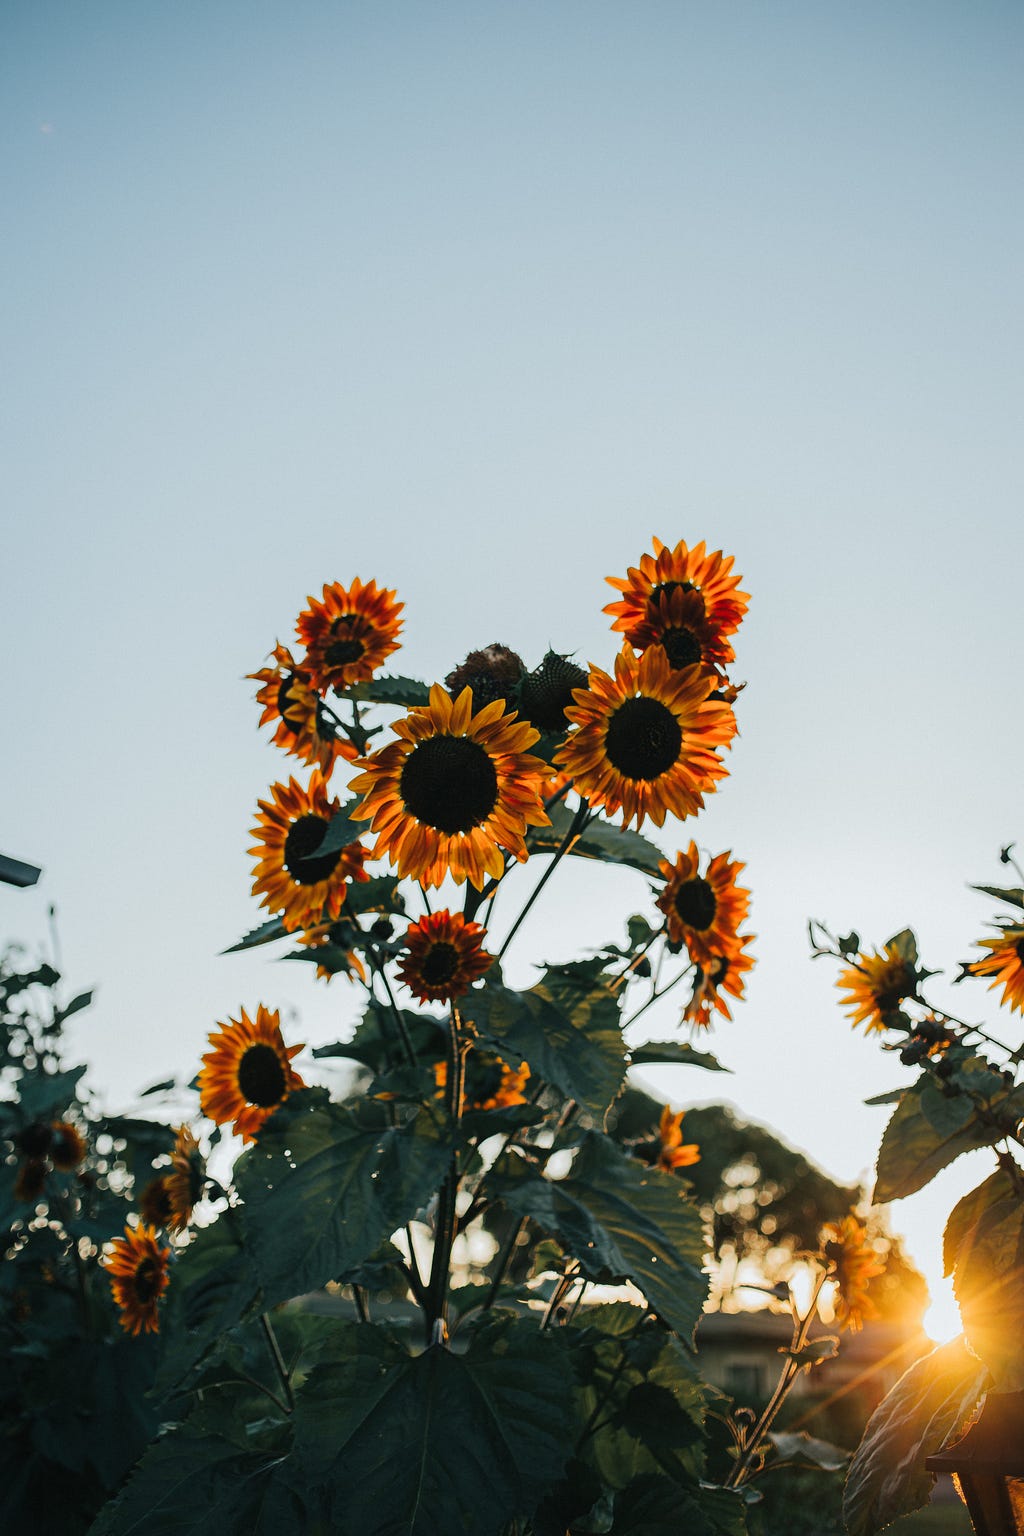 sunflowers with the sunset shining behind them